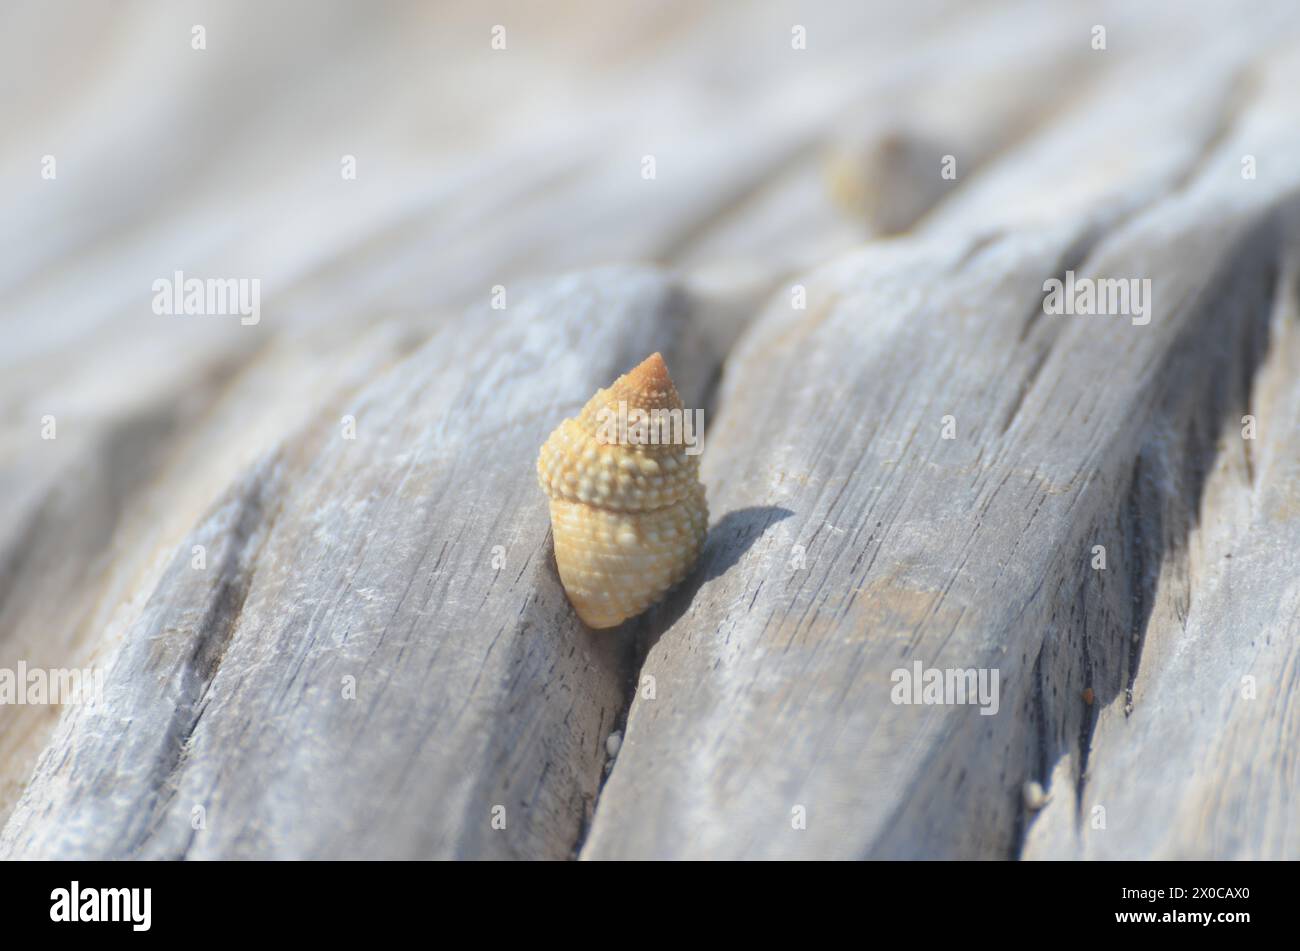 A pile of shells on a log. The shells are of different sizes and colors. The log is brown and has a rough texture. The scene gives off a sense of natu Stock Photo